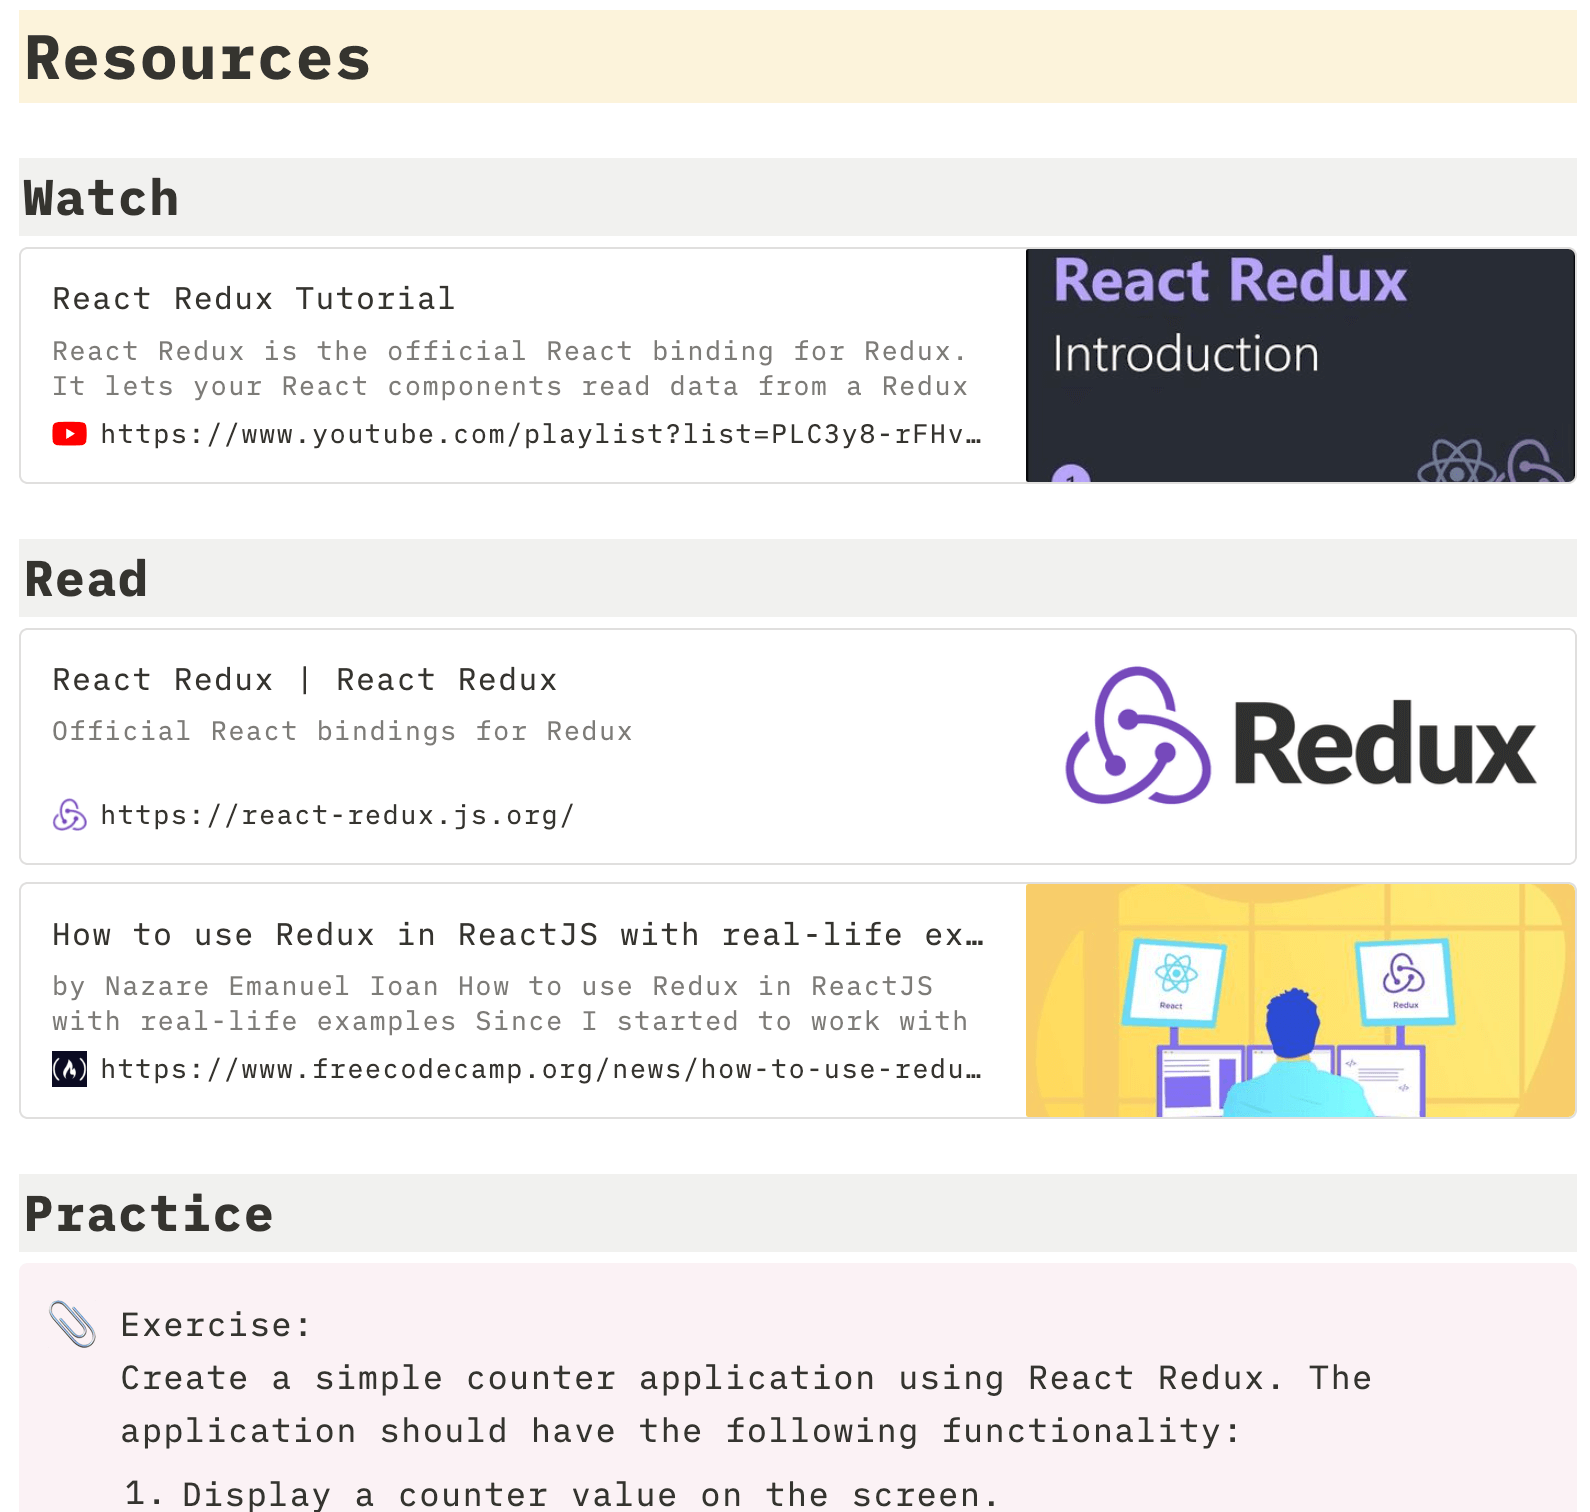 Resources section